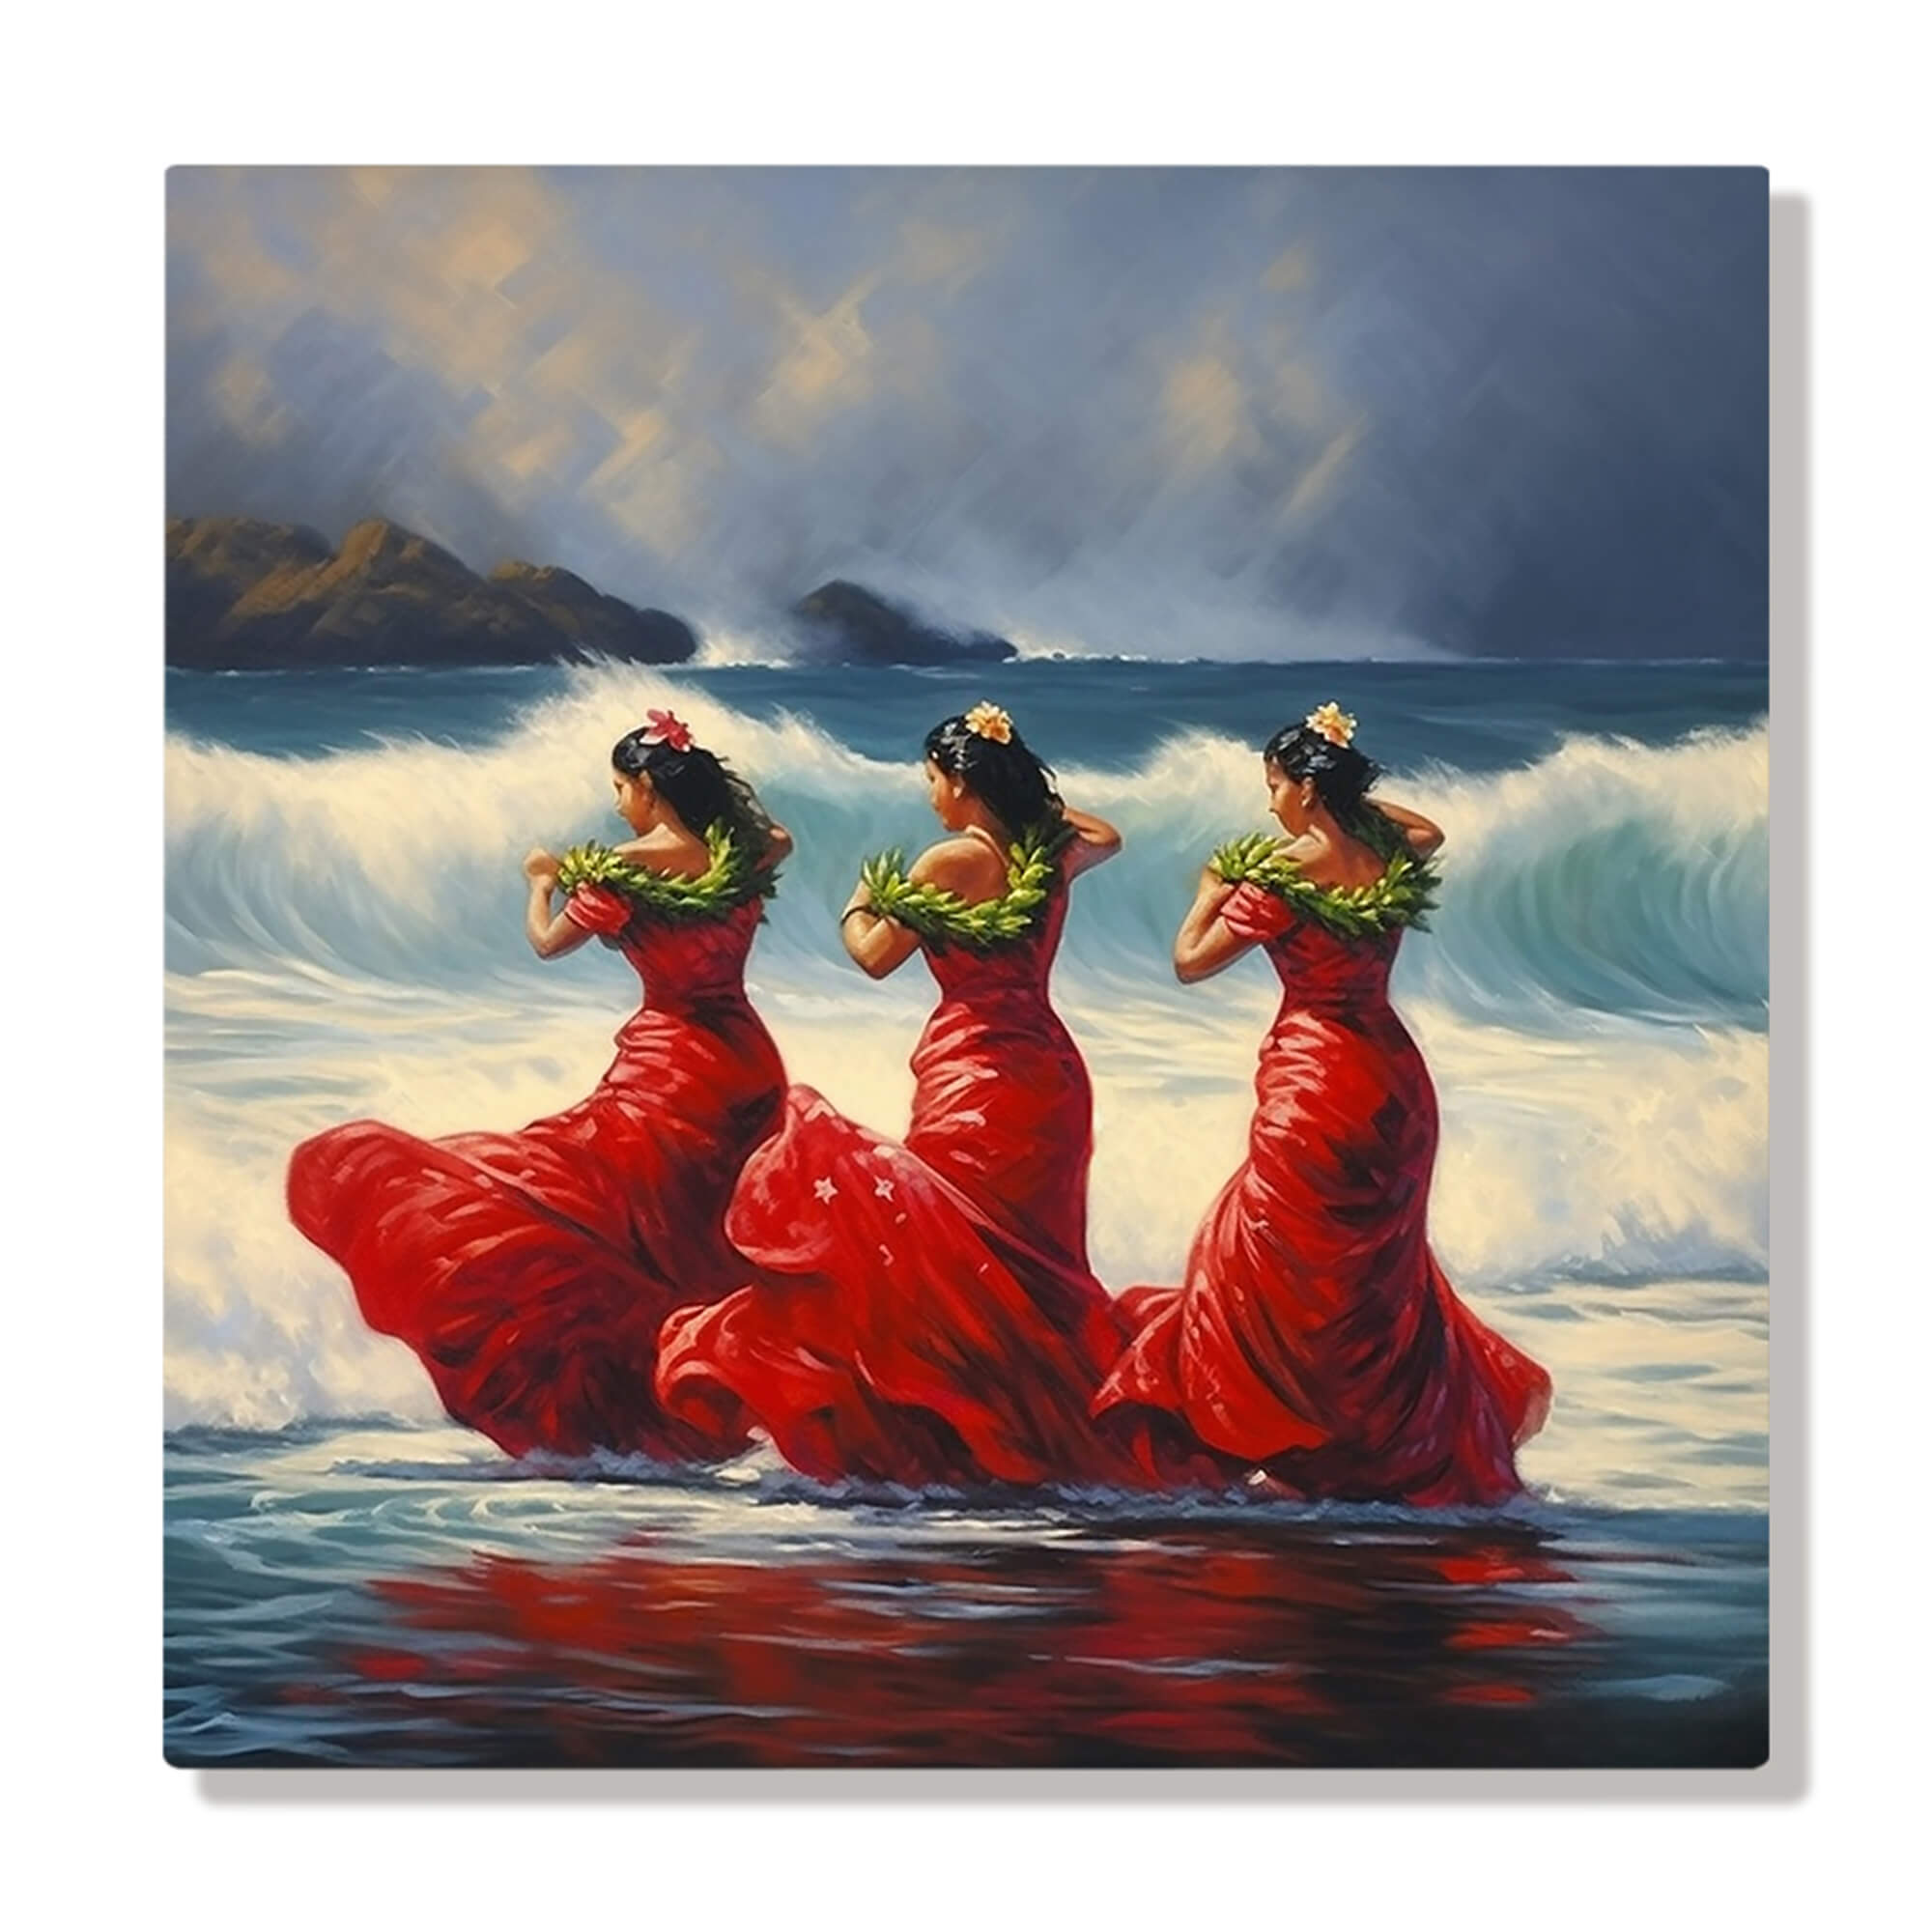 Hula Dancers Performing on the Shores of Hawaii